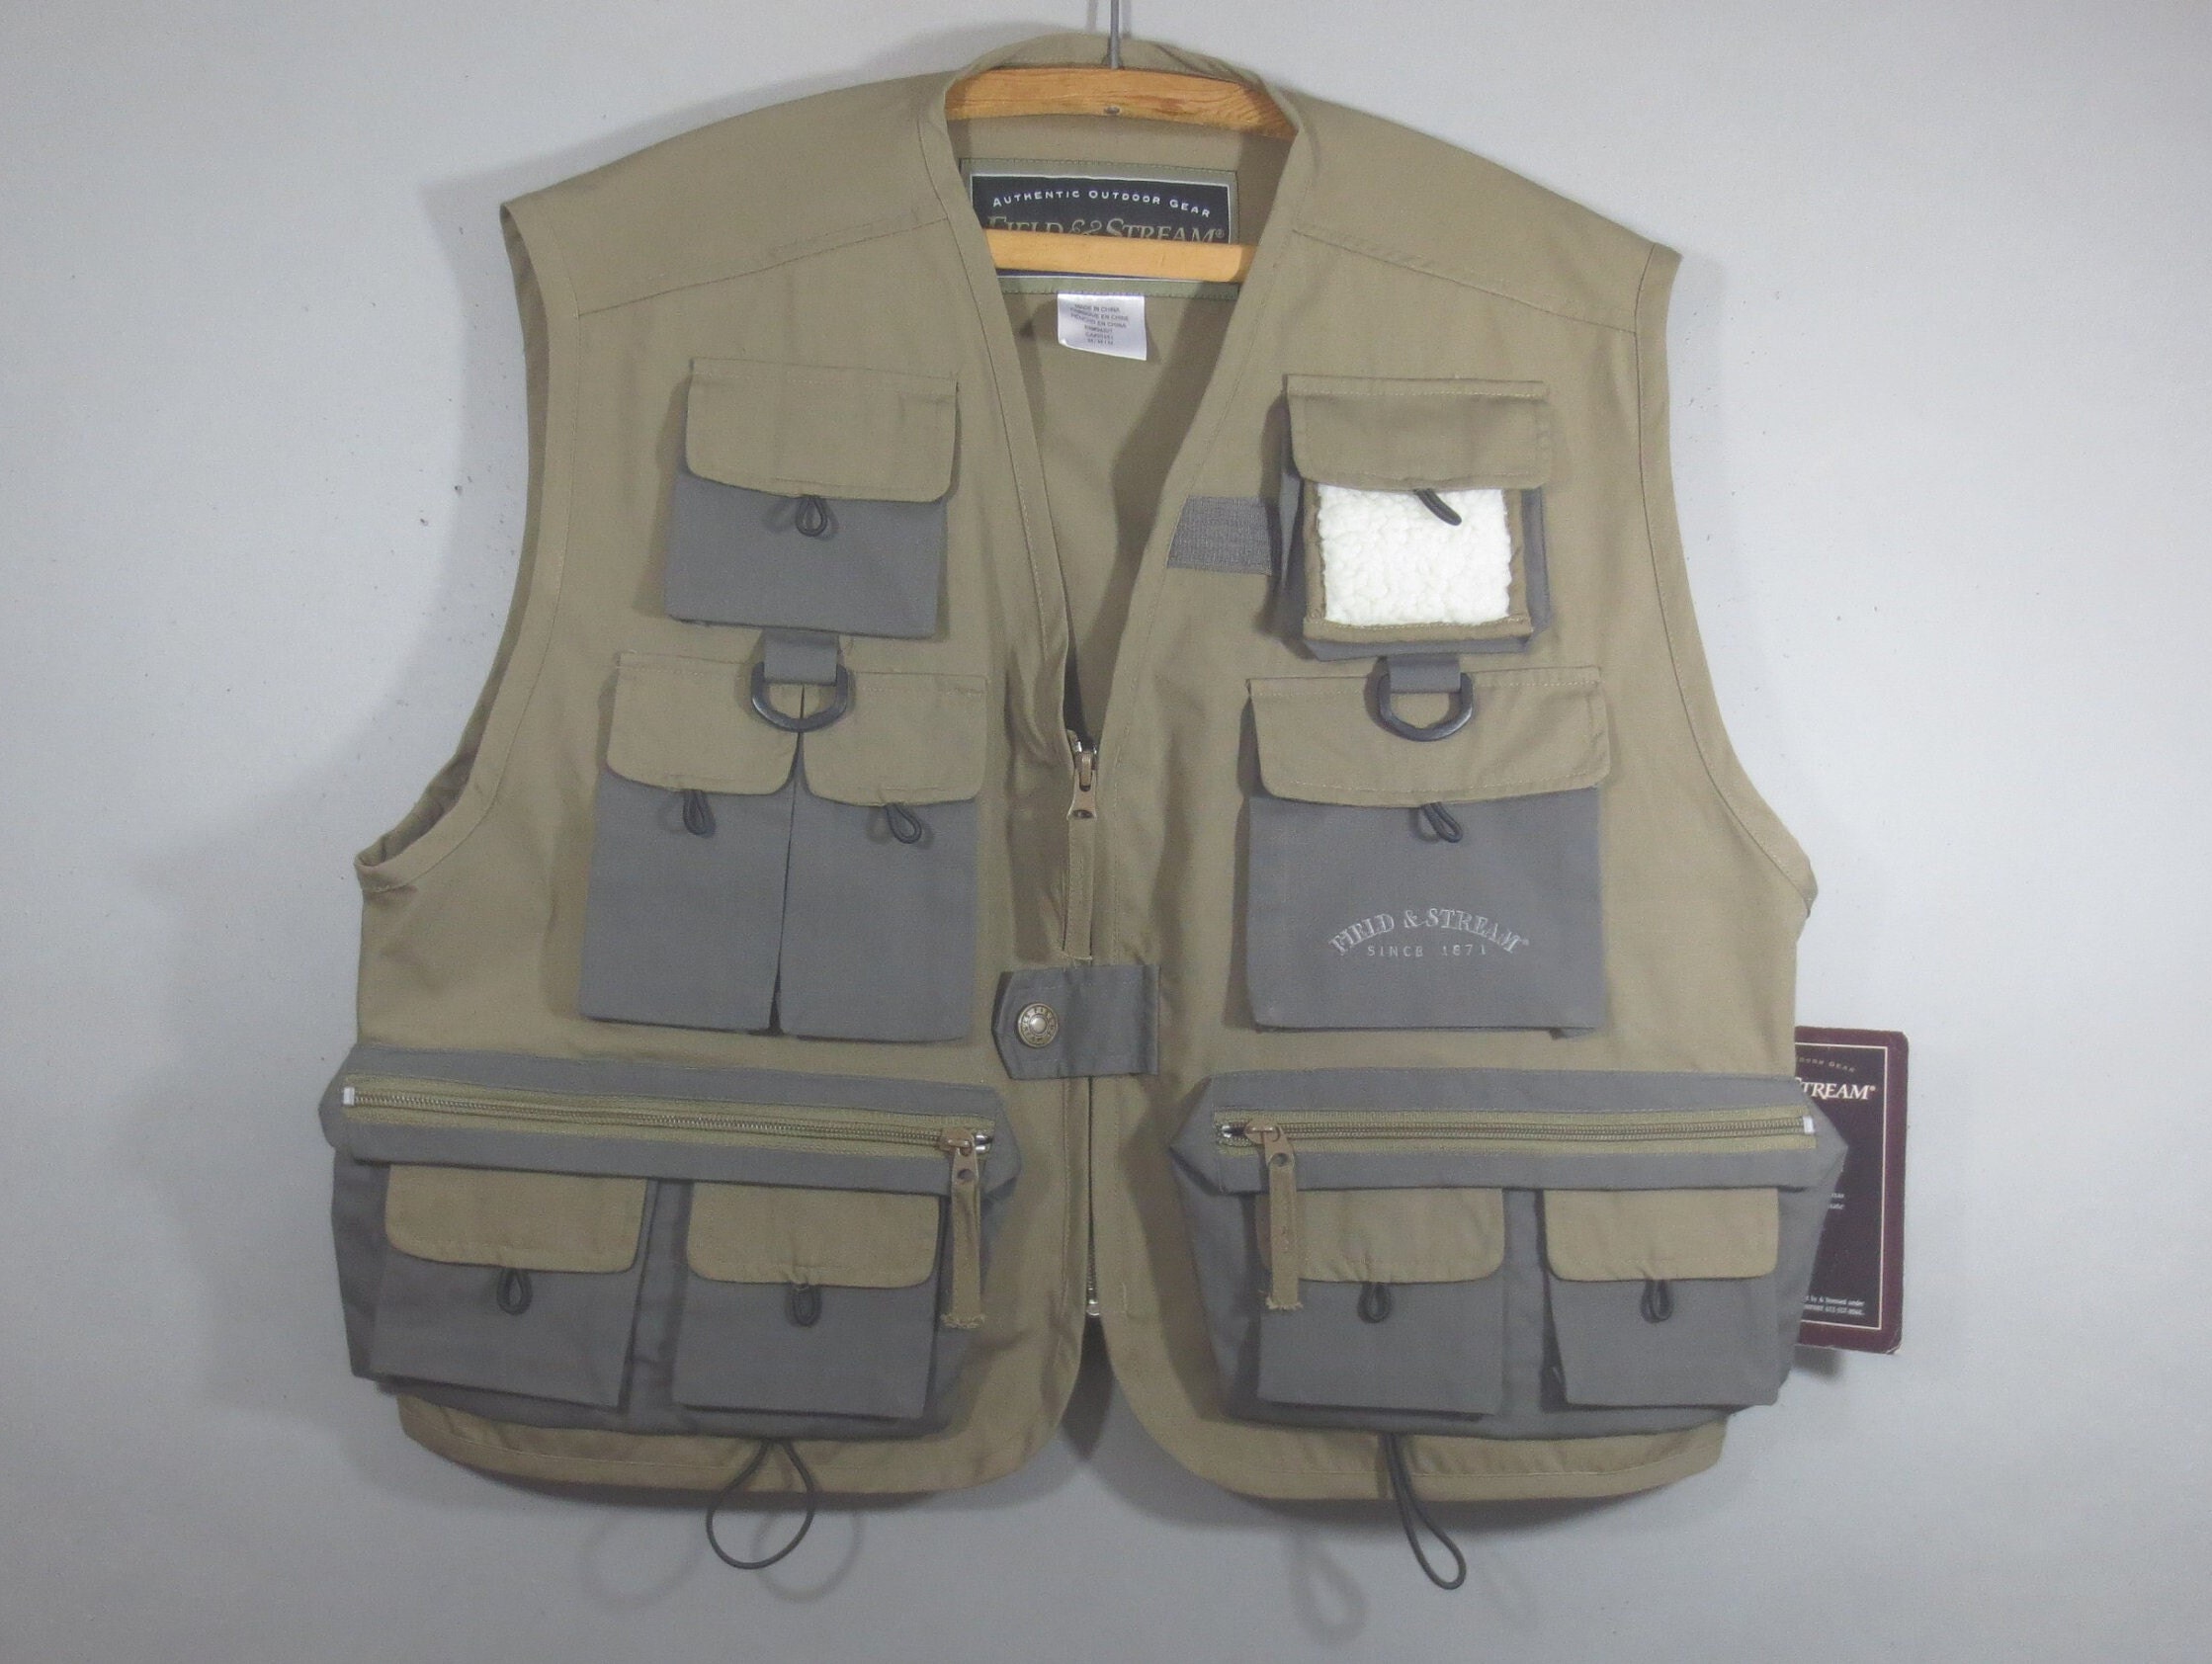 FIELD and STREAM Fishing Vest, Zipper Front, Zipper Pockets, Velcro Close  Pockets, Back Zipper Pocket, New Condition, Tag Still Attached 